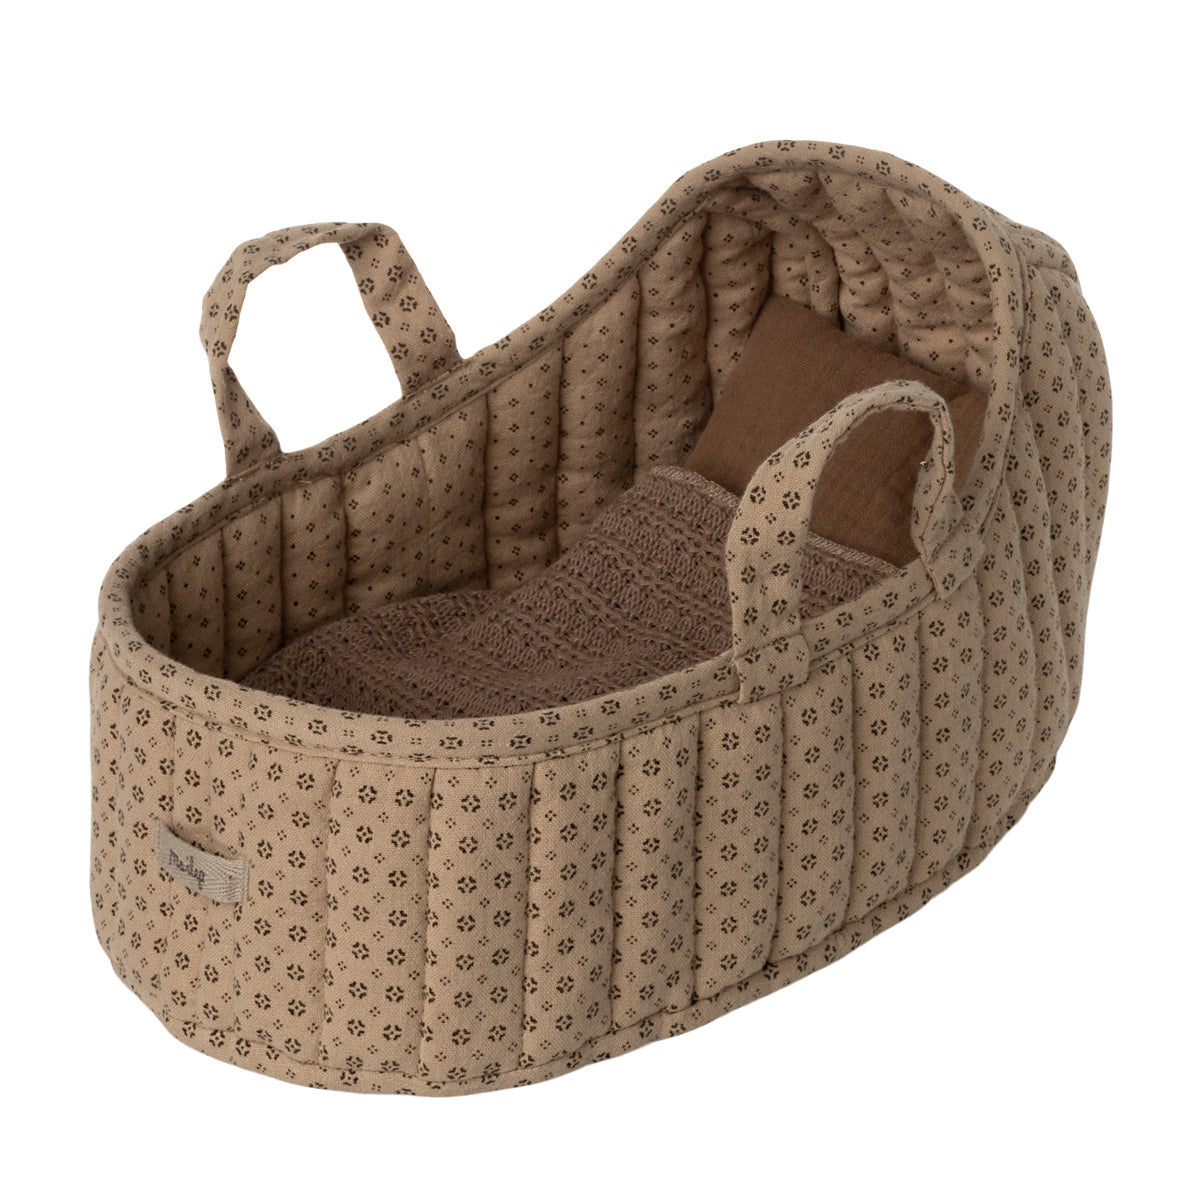 Maileg Carry Cot, Large - Sand 11-3404-00